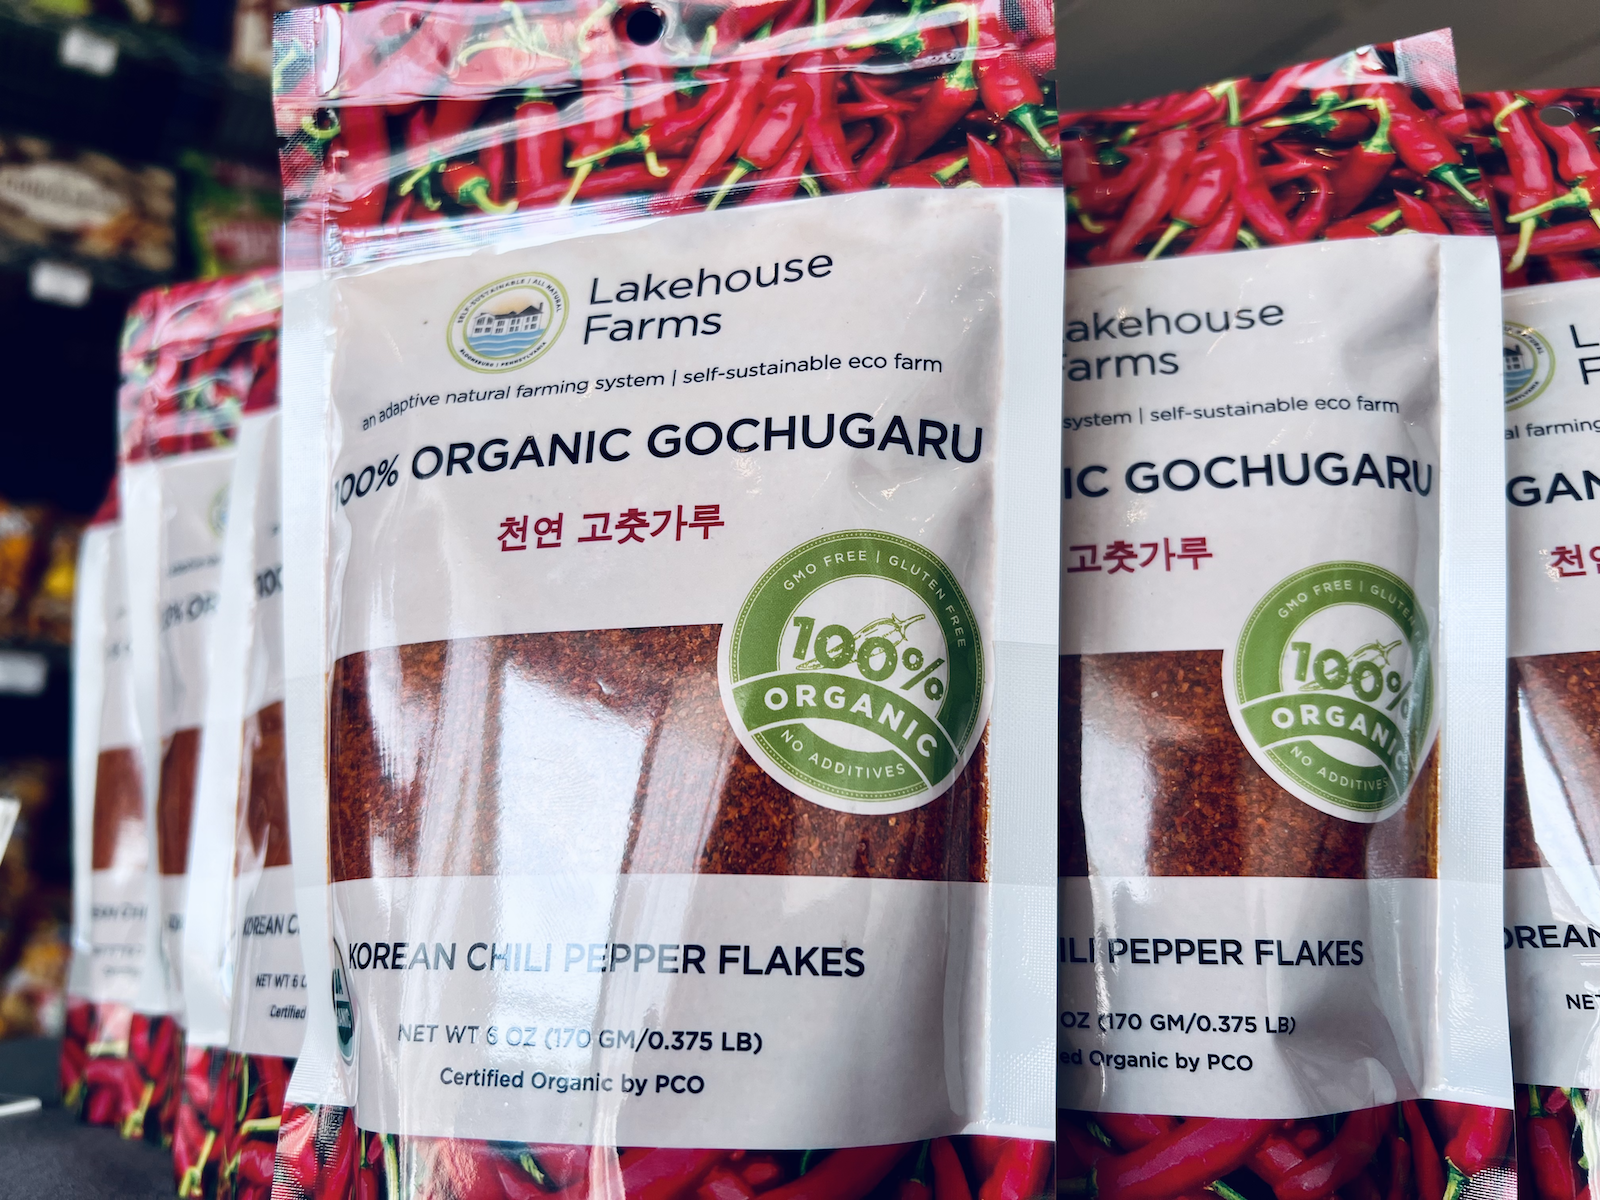 True Kimchi Cafe's shelves are stocked with Korean staples, like gochujang, doenjang, and gochugaru—the chili flake that’s responsible for the heat and red hue in many types of kimchi.